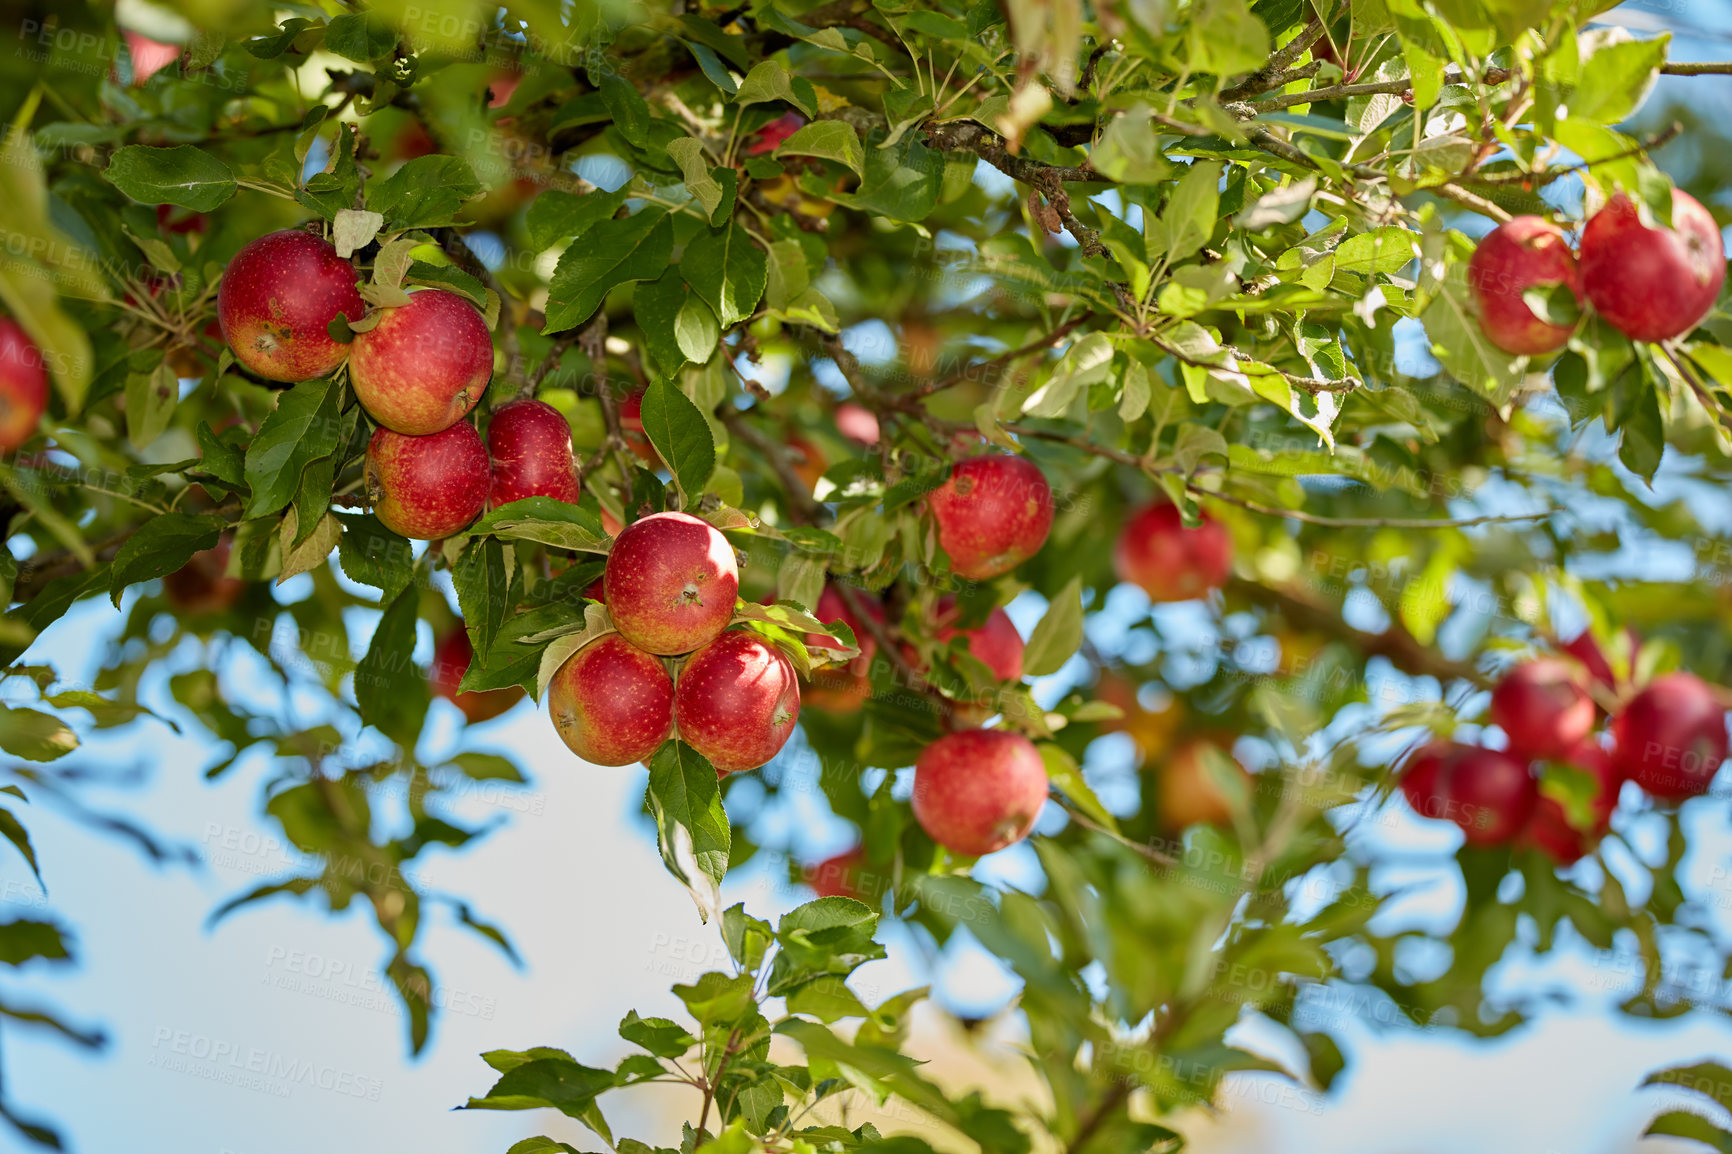 Buy stock photo Fresh red apples growing on a fruit tree on a summer day. Beautiful organic food hanging on a lush green branch with leaves outdoors in spring. Healthy crops ready for harvest in nature on a farm